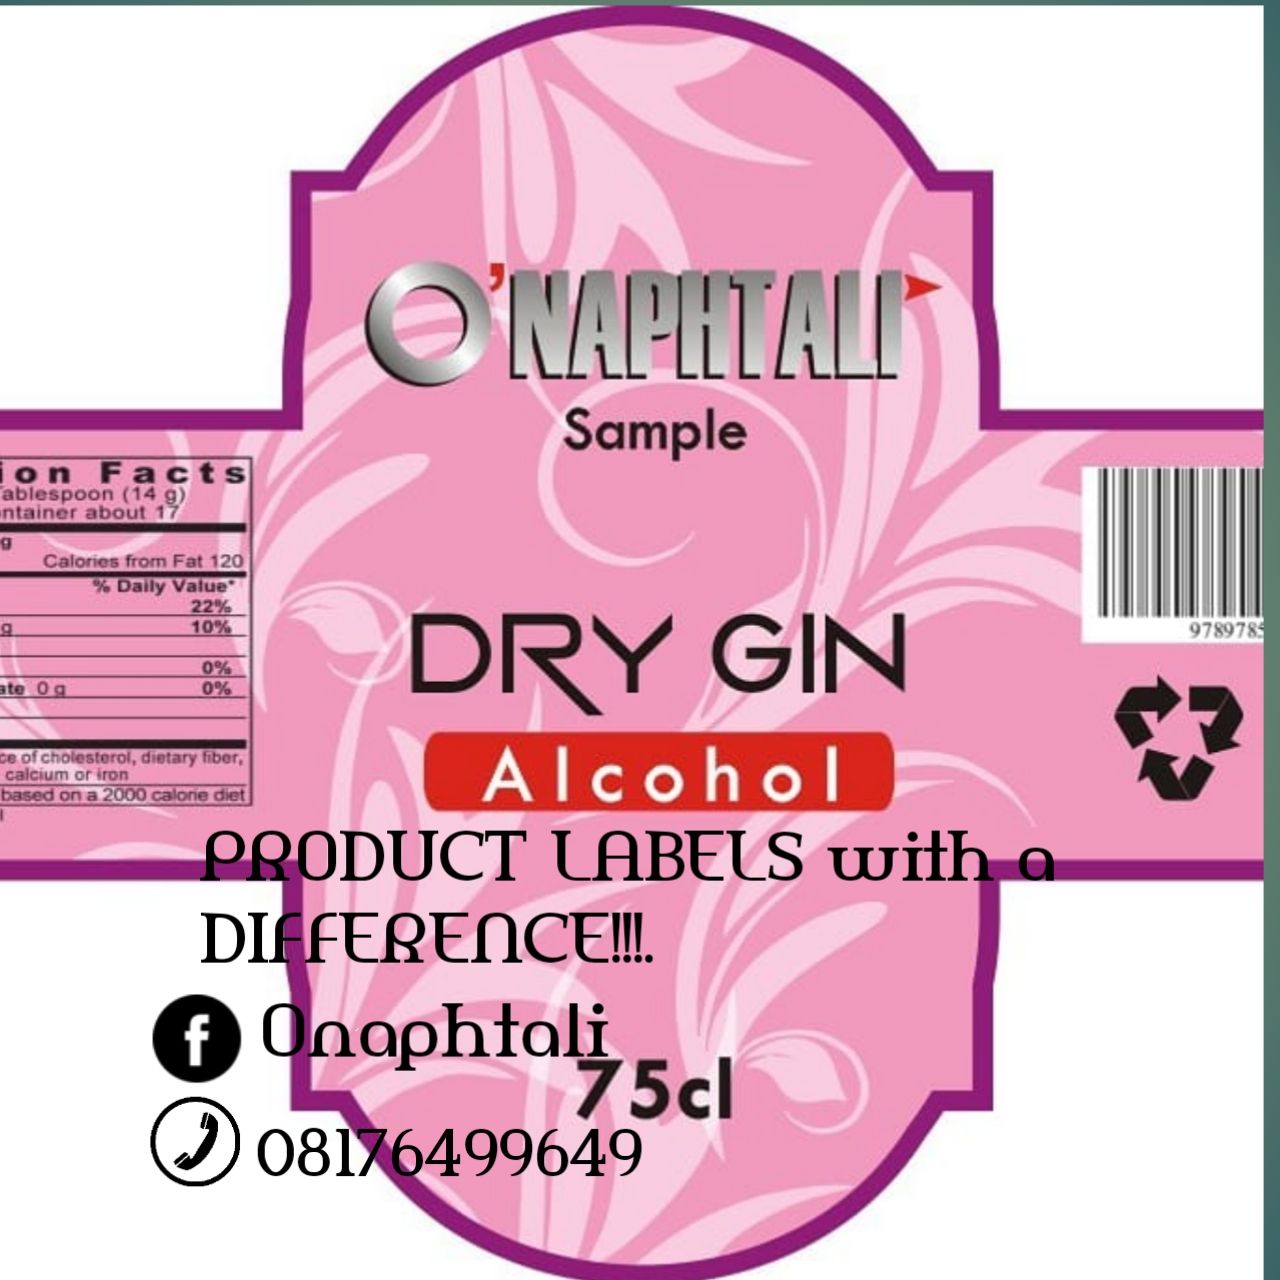 PRODUCT LABEL PRINTING IN LAGOS NIGERIA CALL EMMANUEL ON 08176499649